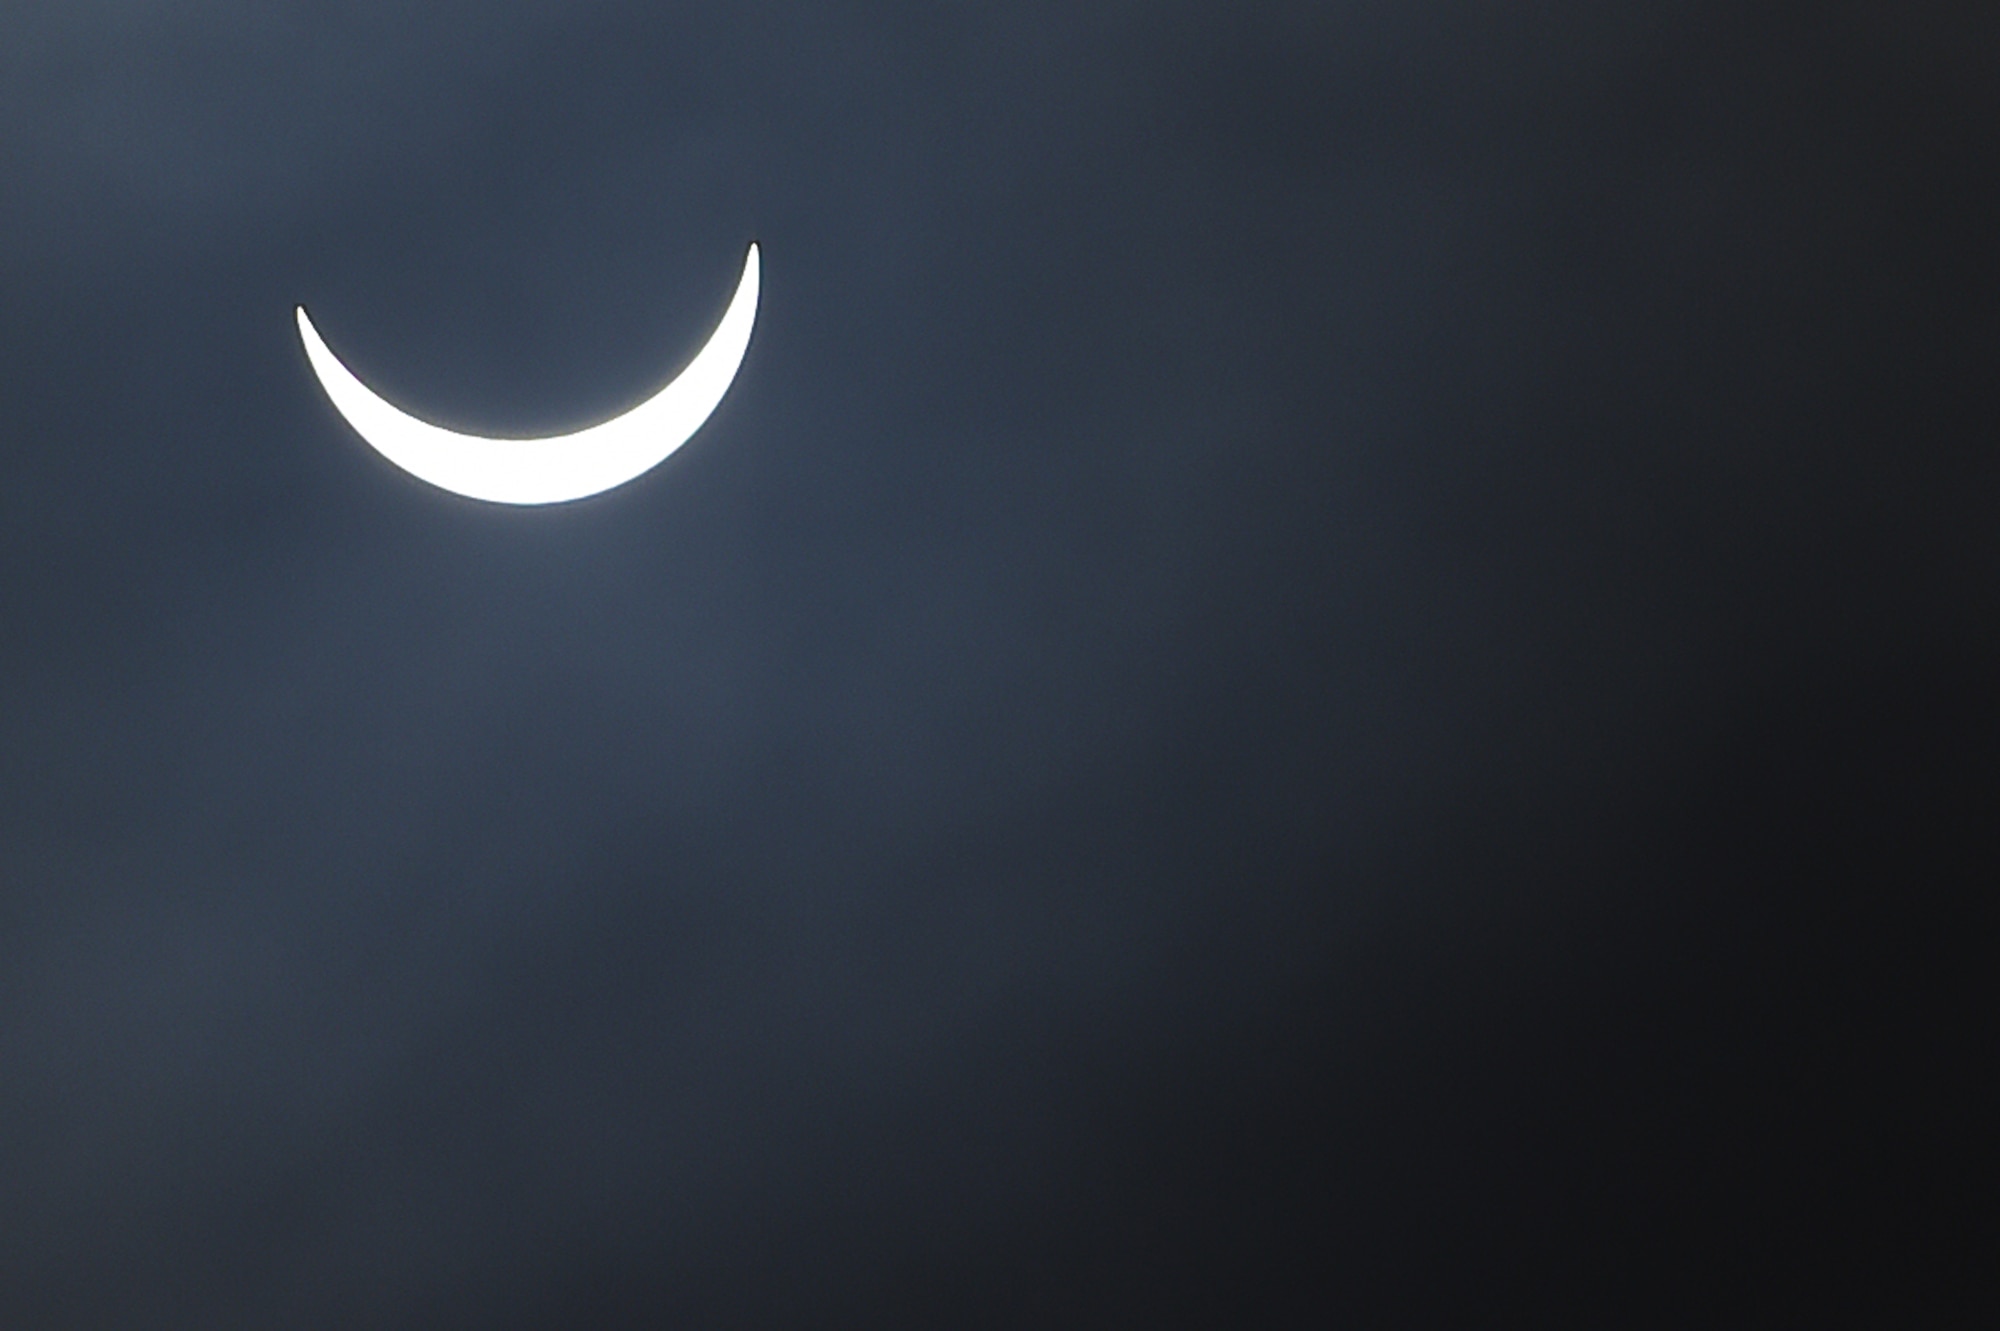 The moon moves past its position between the sun and the Earth at 9:37 a.m. during a solar eclipse, visible from RAF Alconbury, England, March 20, 2015. During this eclipse, only part of the sun was obscured. (U.S. Air Force photo by Staff Sgt. Jarad A. Denton/Released)